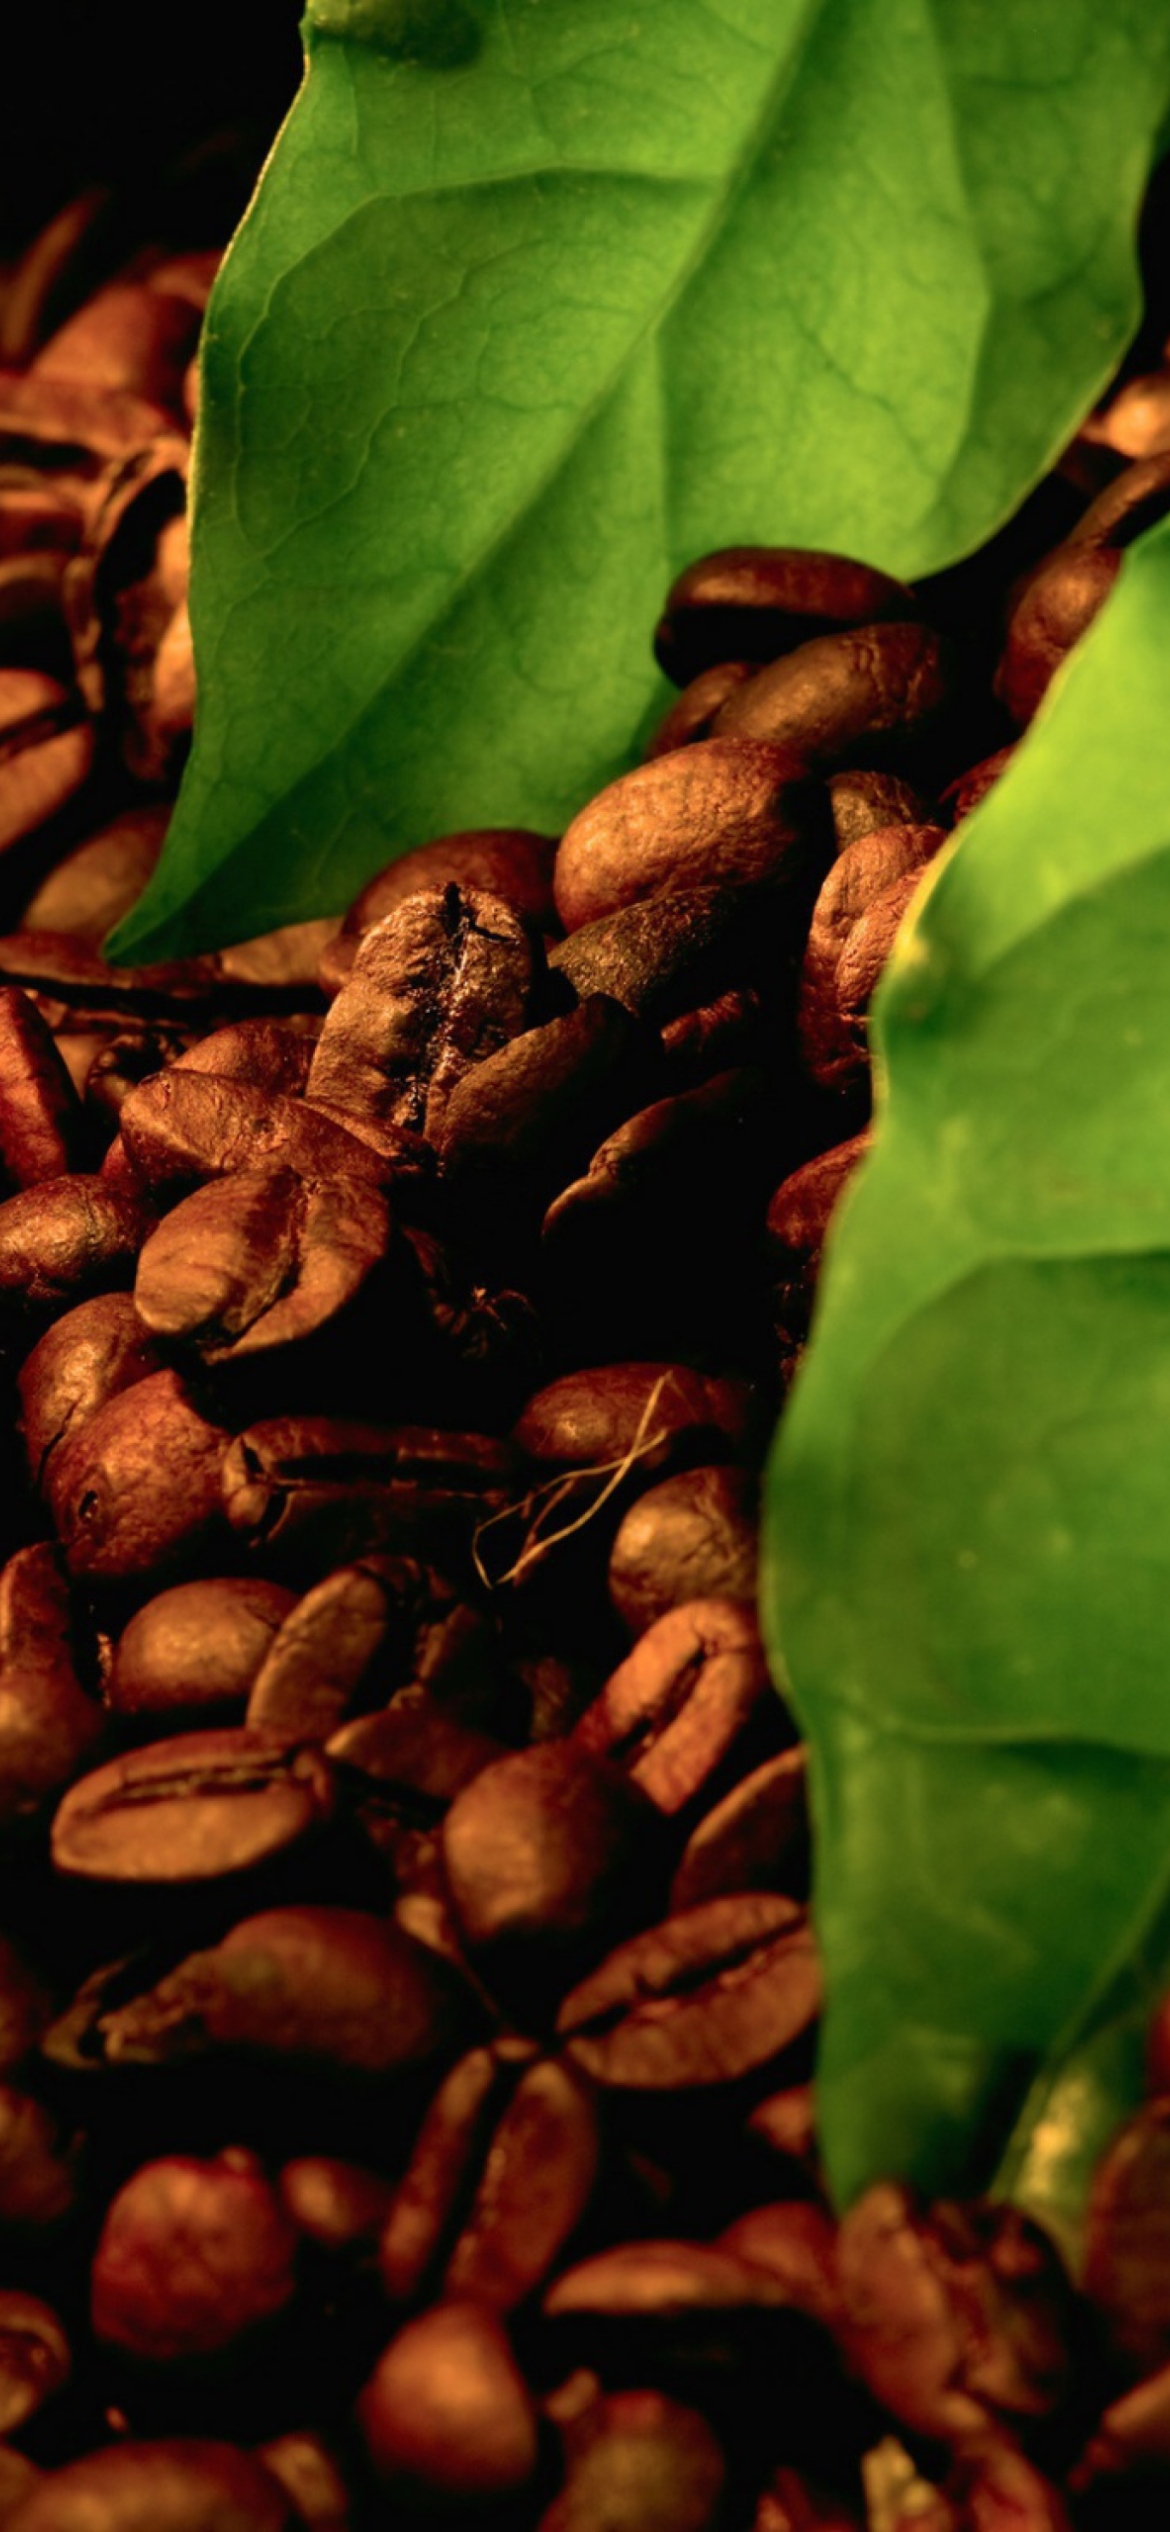 Das Coffee Beans And Green Leaves Wallpaper 1170x2532